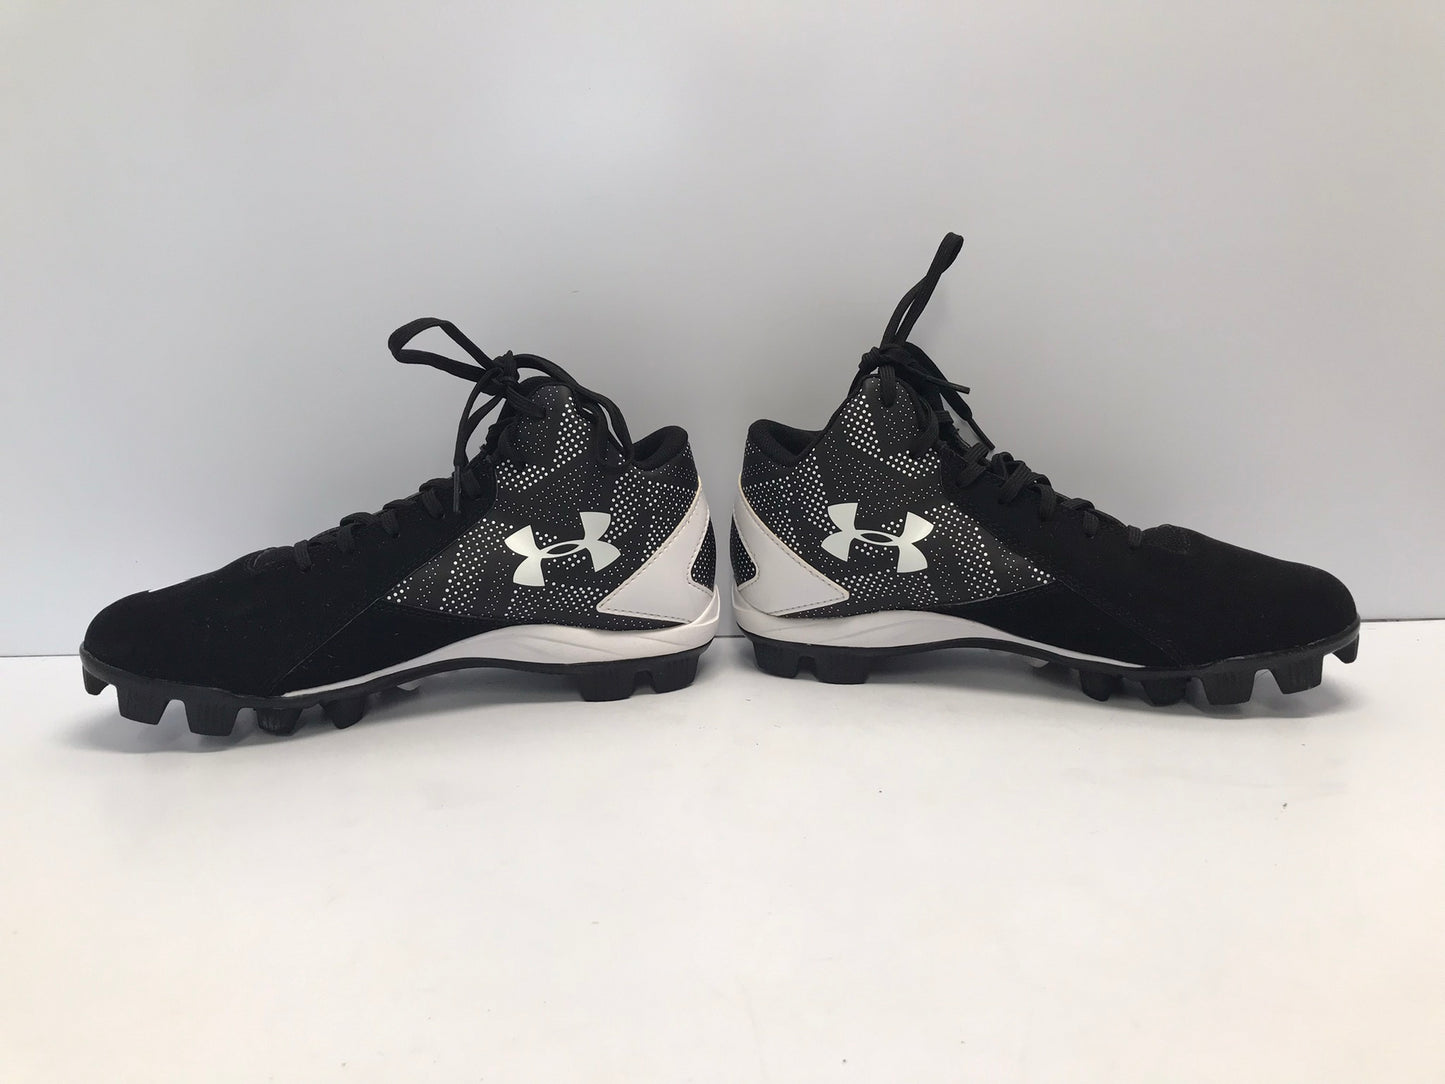 Baseball Shoes Cleats Men's Size 7.5 Under Armour High Top Black White Like New